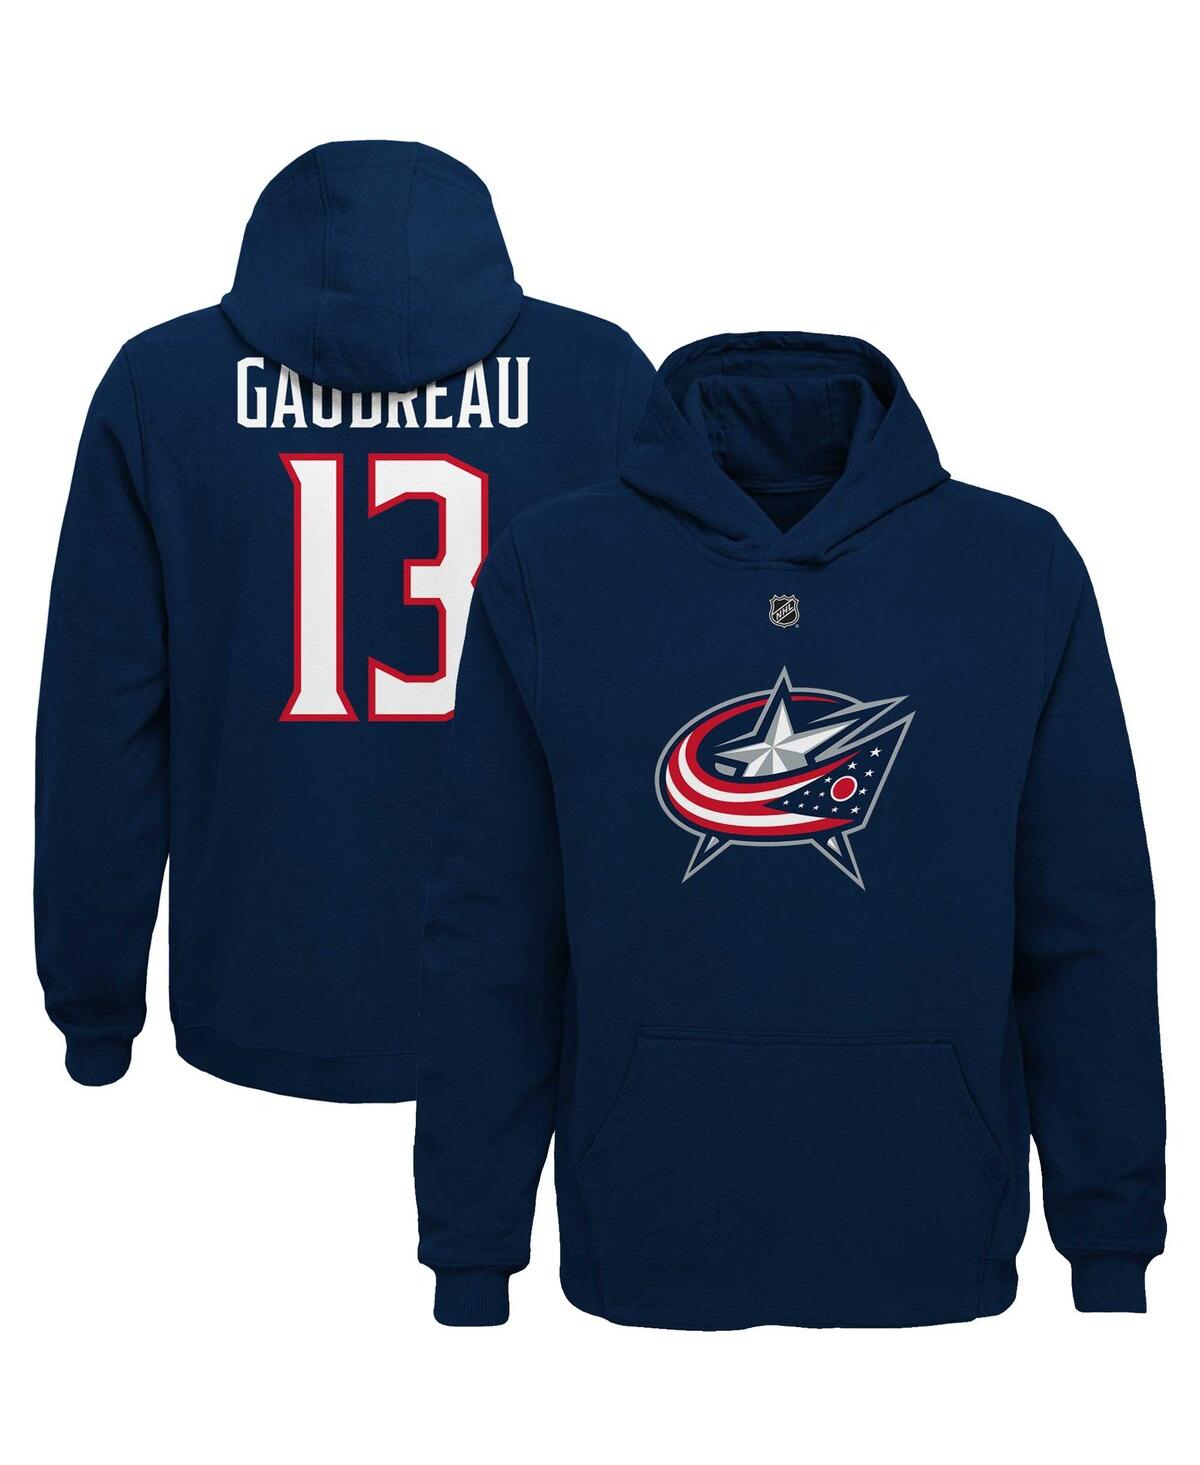 Outerstuff Kids' Big Boys Johnny Gaudreau Navy Columbus Blue Jackets Player Name And Number Hoodie